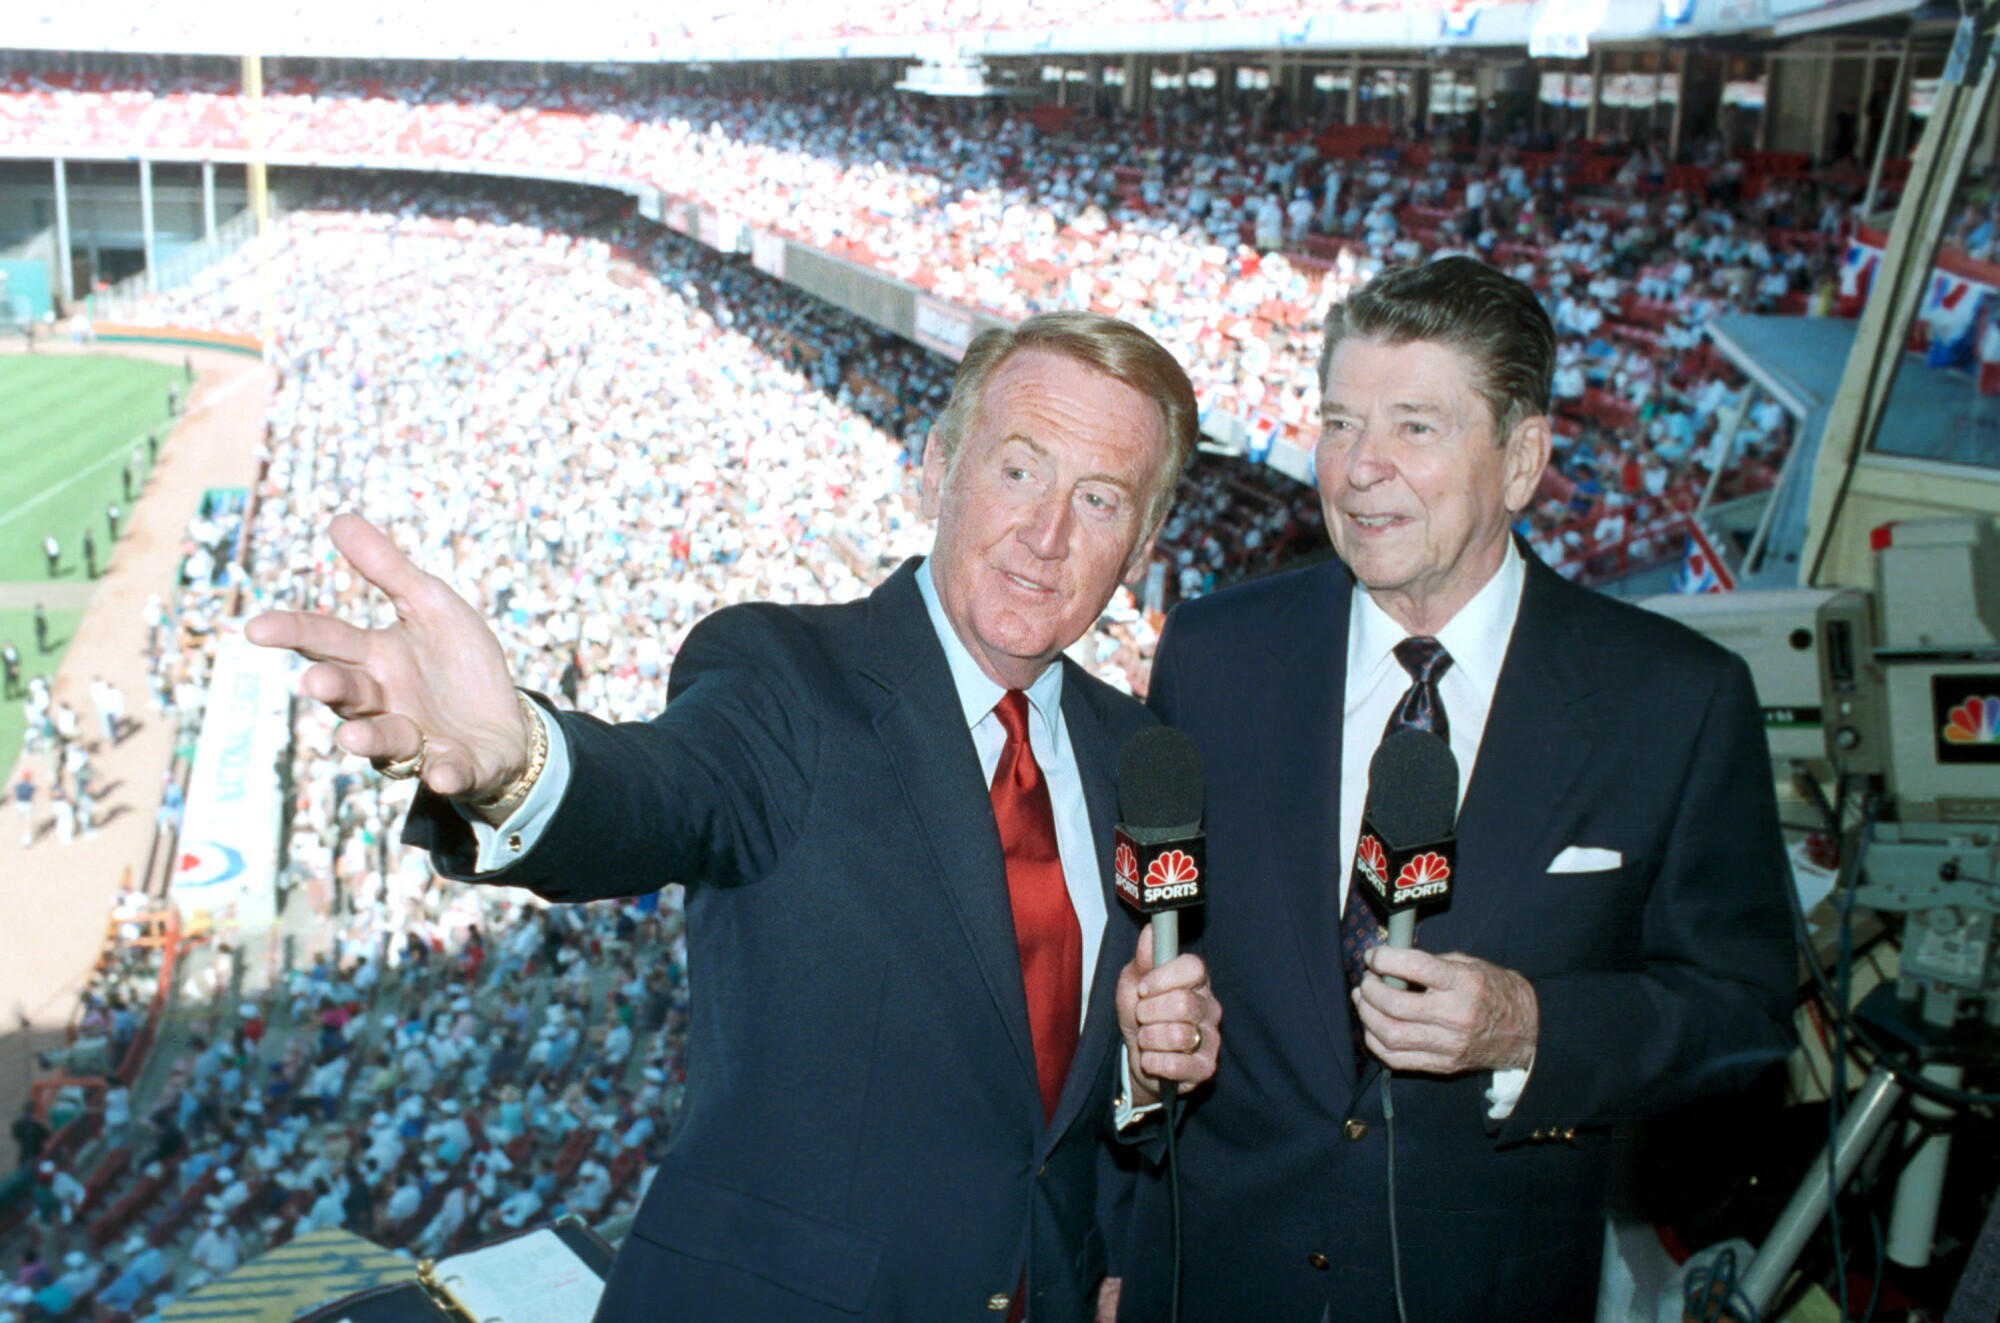 Former President Ronald Reagan joins Vin Scully in the announcers booth at Anaheim Stadium.